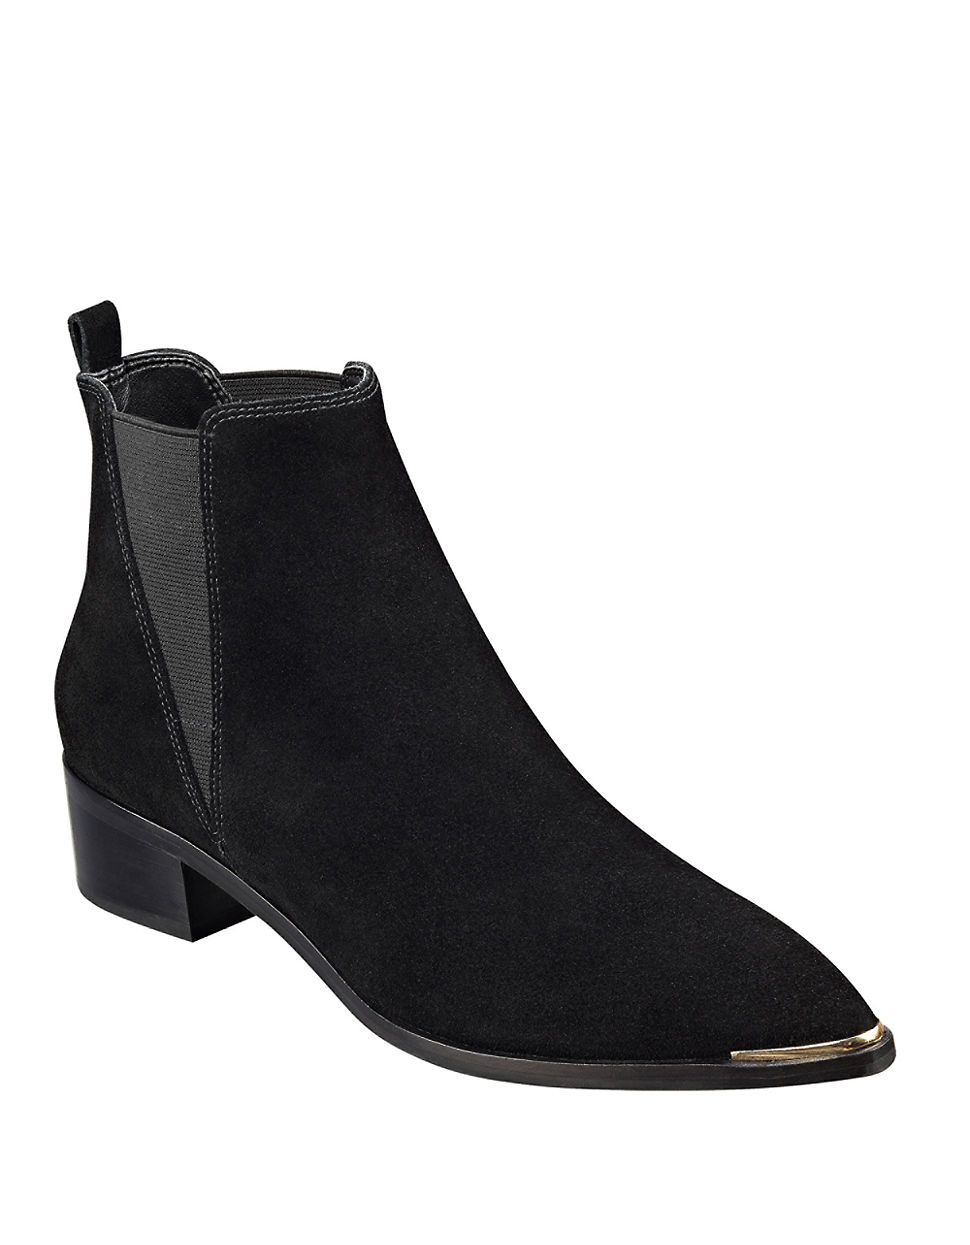 Marc Fisher Yale Suede Chelsea Boots in Black Lyst